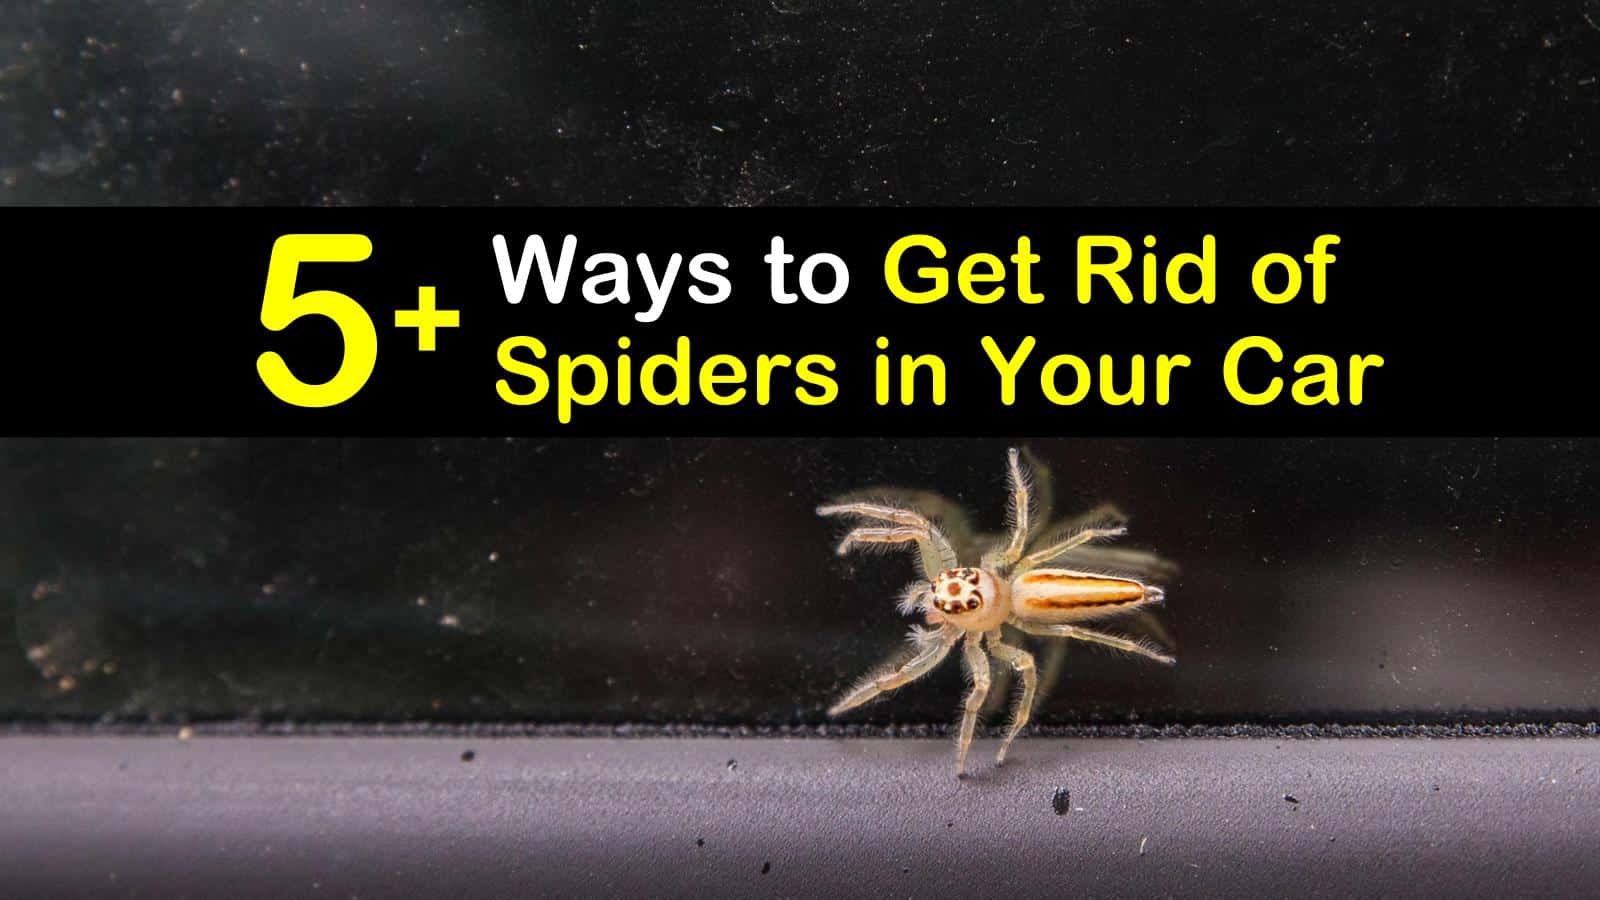 how to get rid of spiders in your car titleimg1